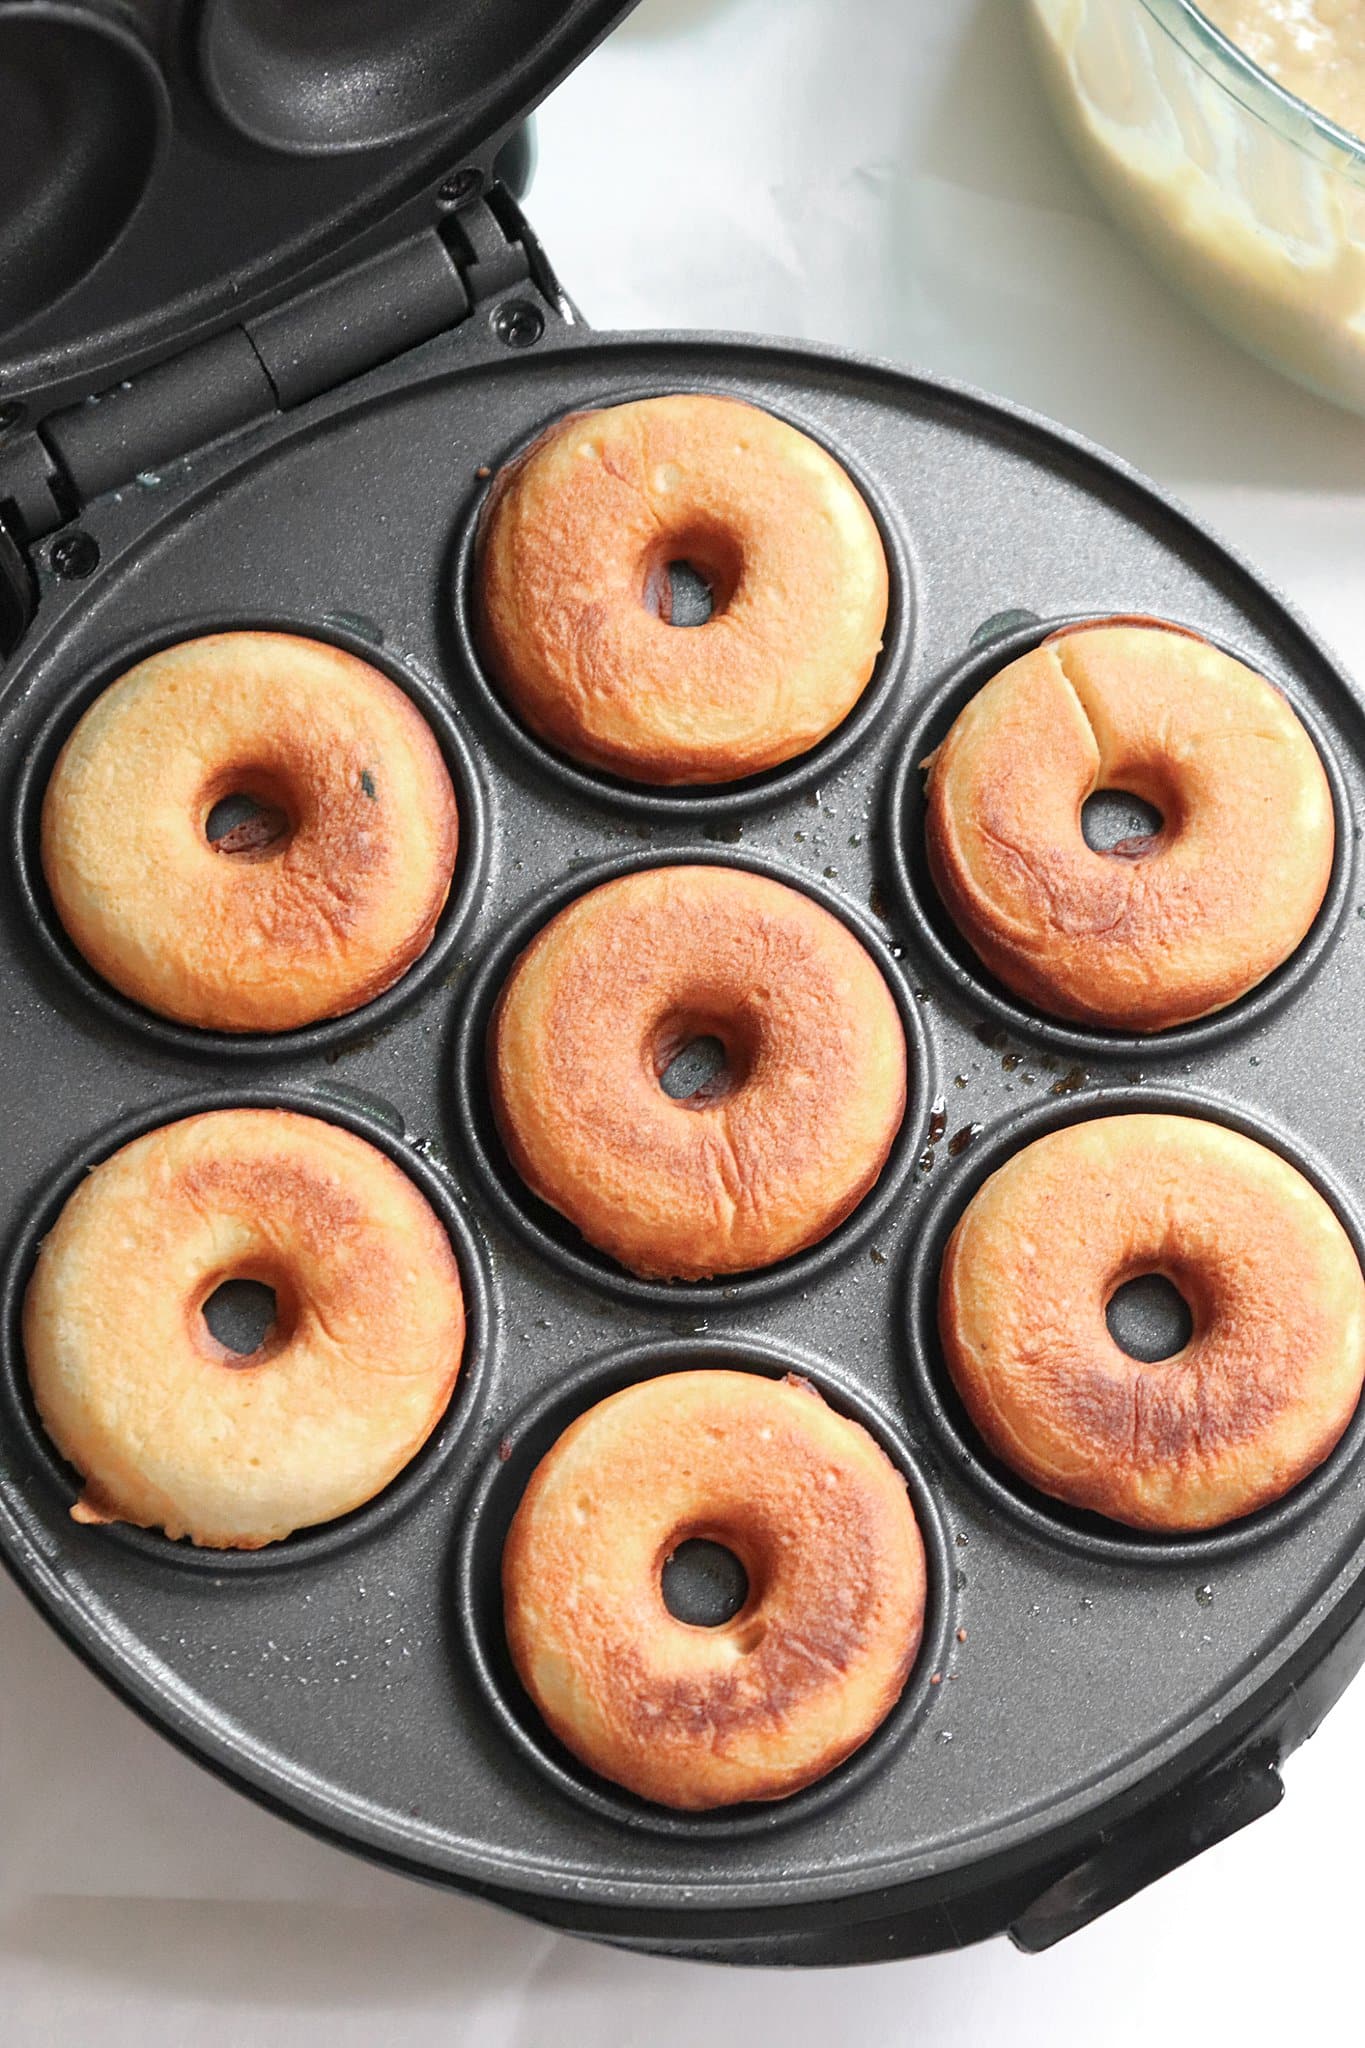 Baked How to Make Homemade Apple Cider Donuts